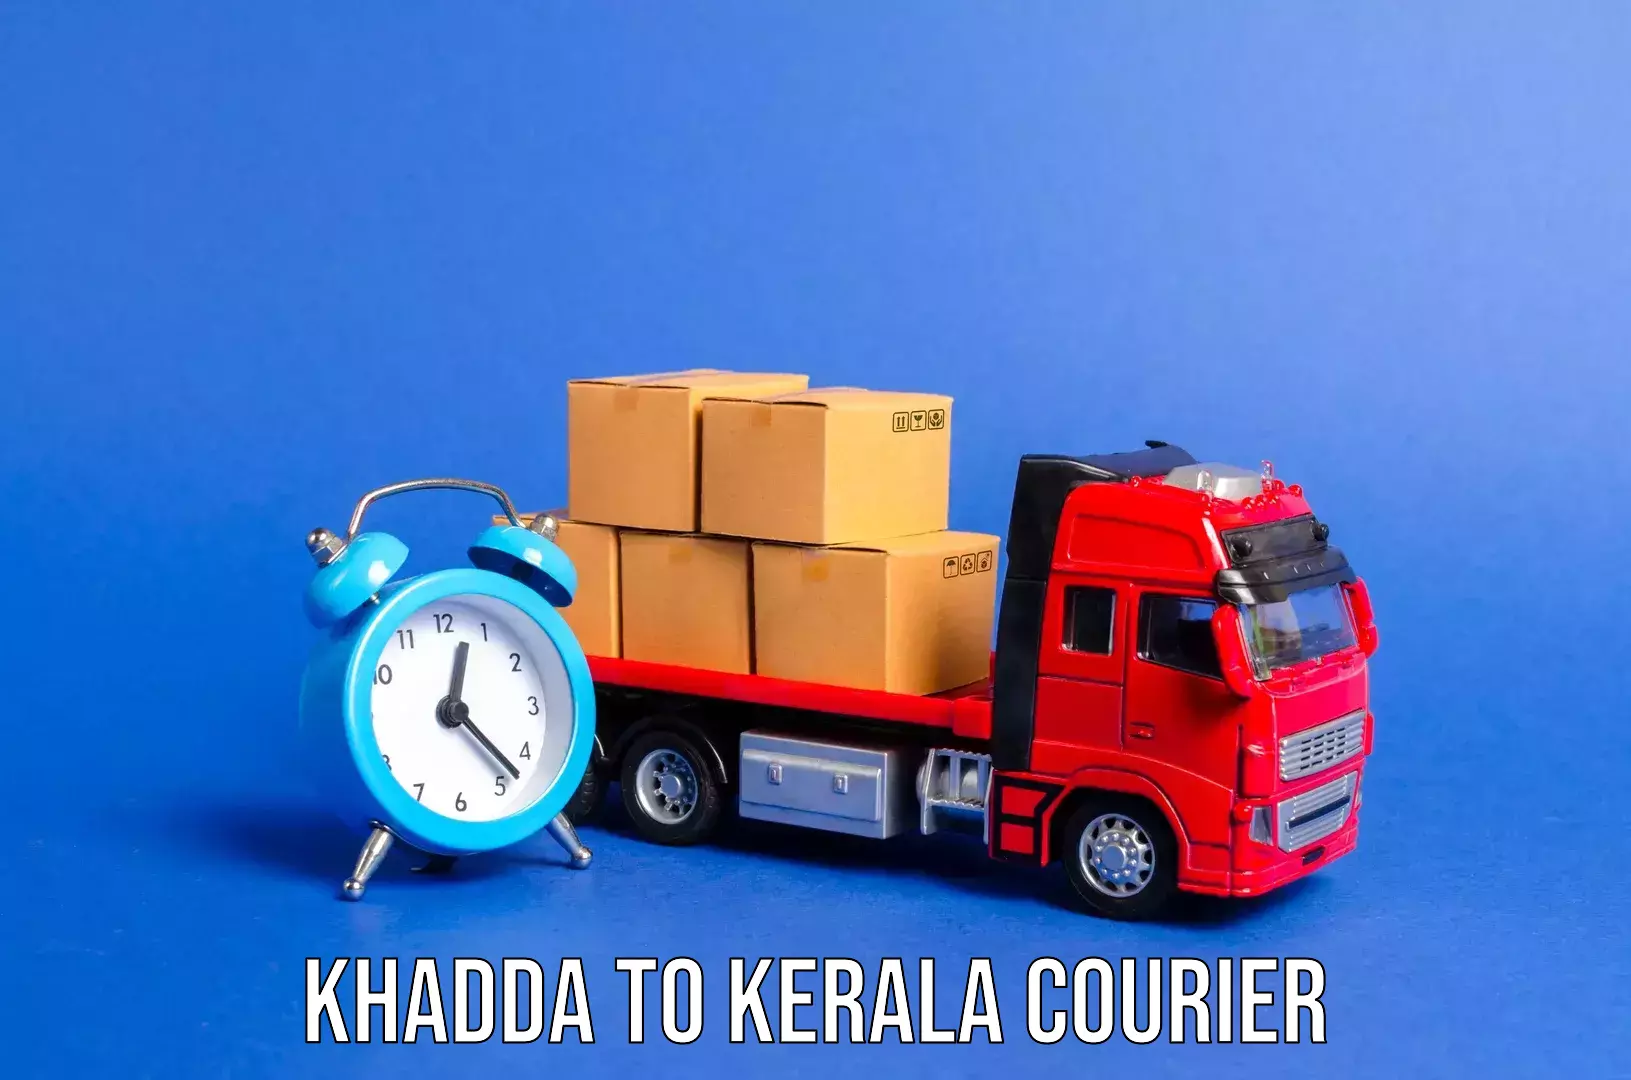 Hassle-free luggage shipping Khadda to Cochin University of Science and Technology